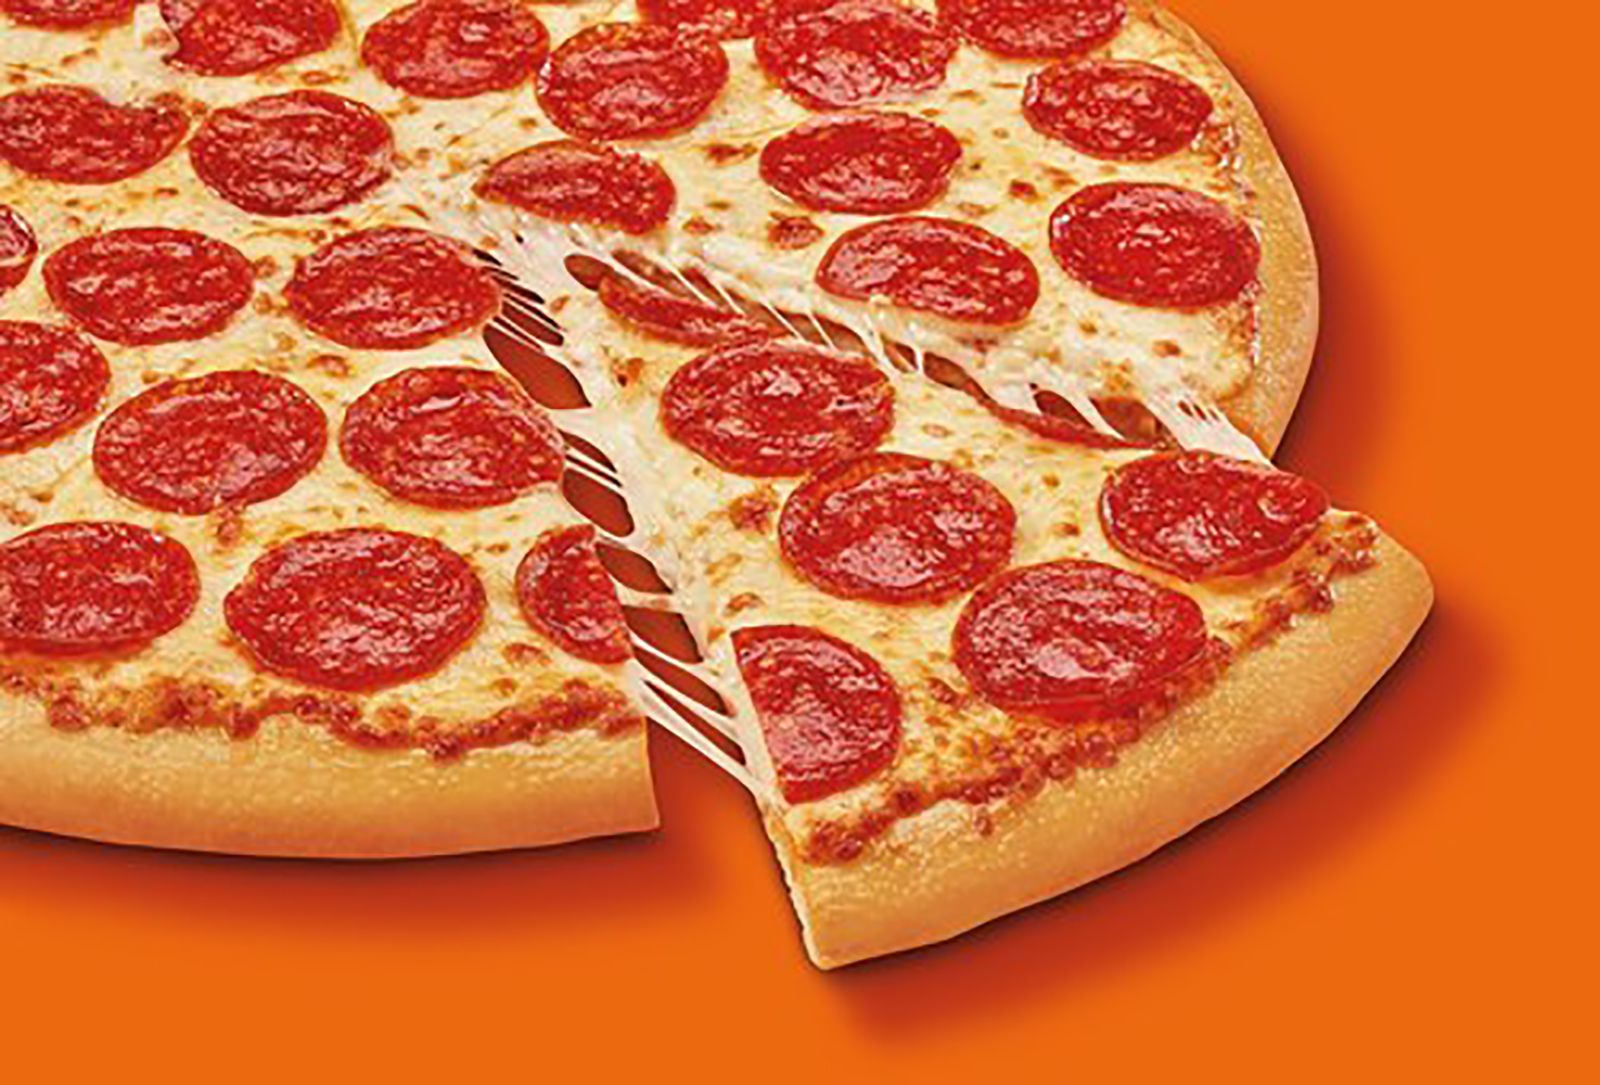 The Makers of America's No. 1 Pepperoni are Changing the Pizza